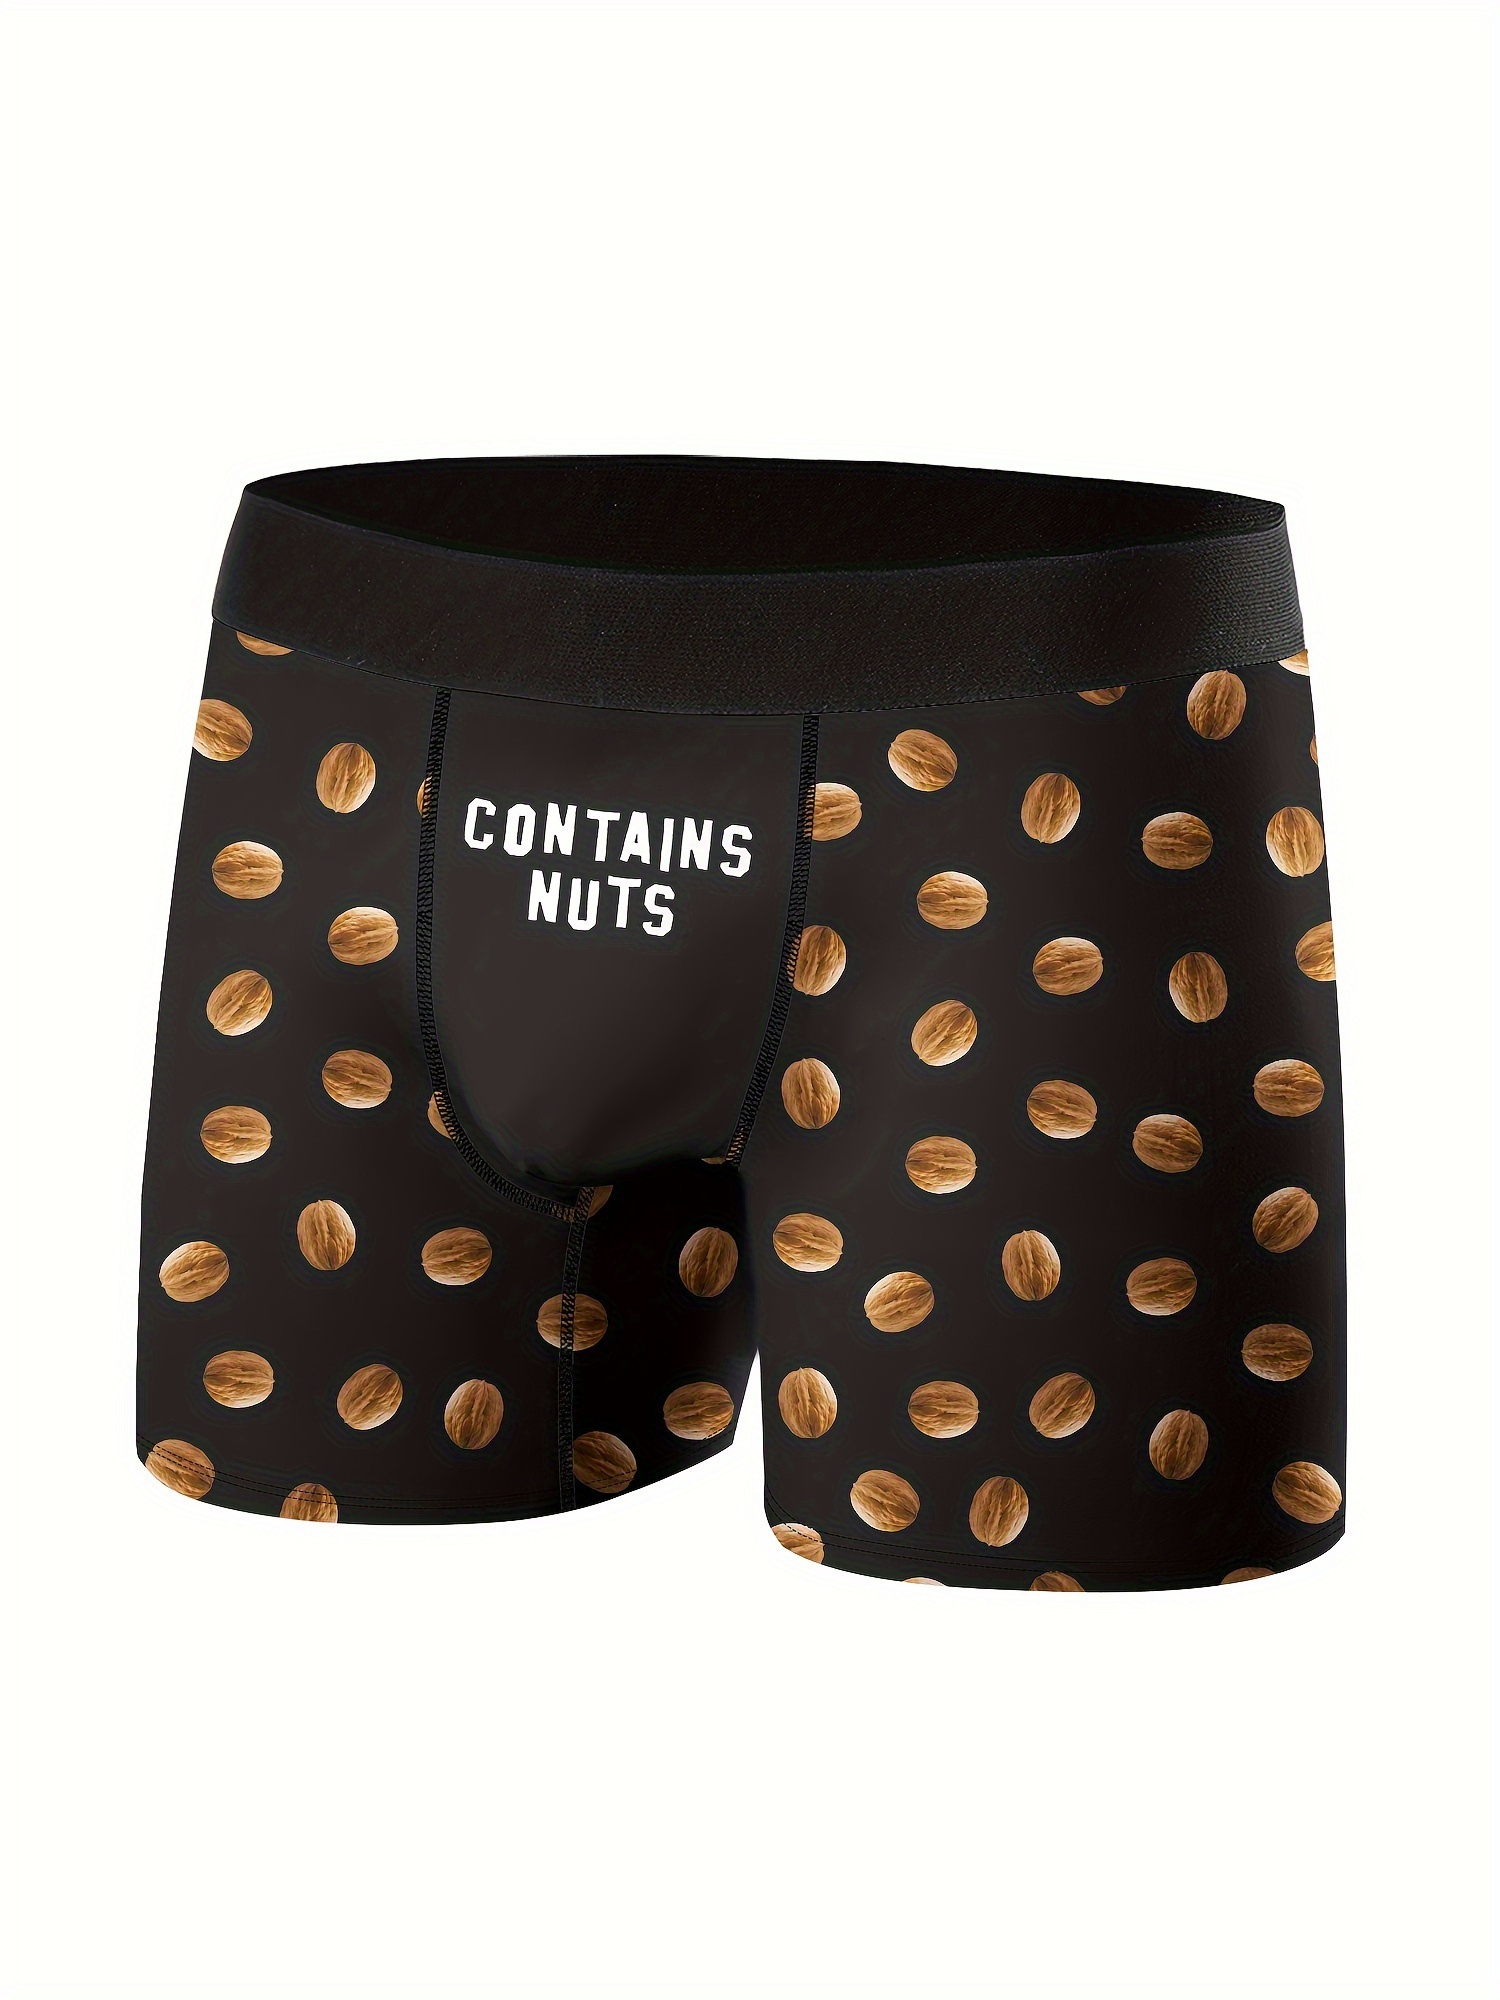 contains nuts print mens fashion novelty boxer briefs shorts breathable comfy high stretch boxer trunks mens underwear details 3